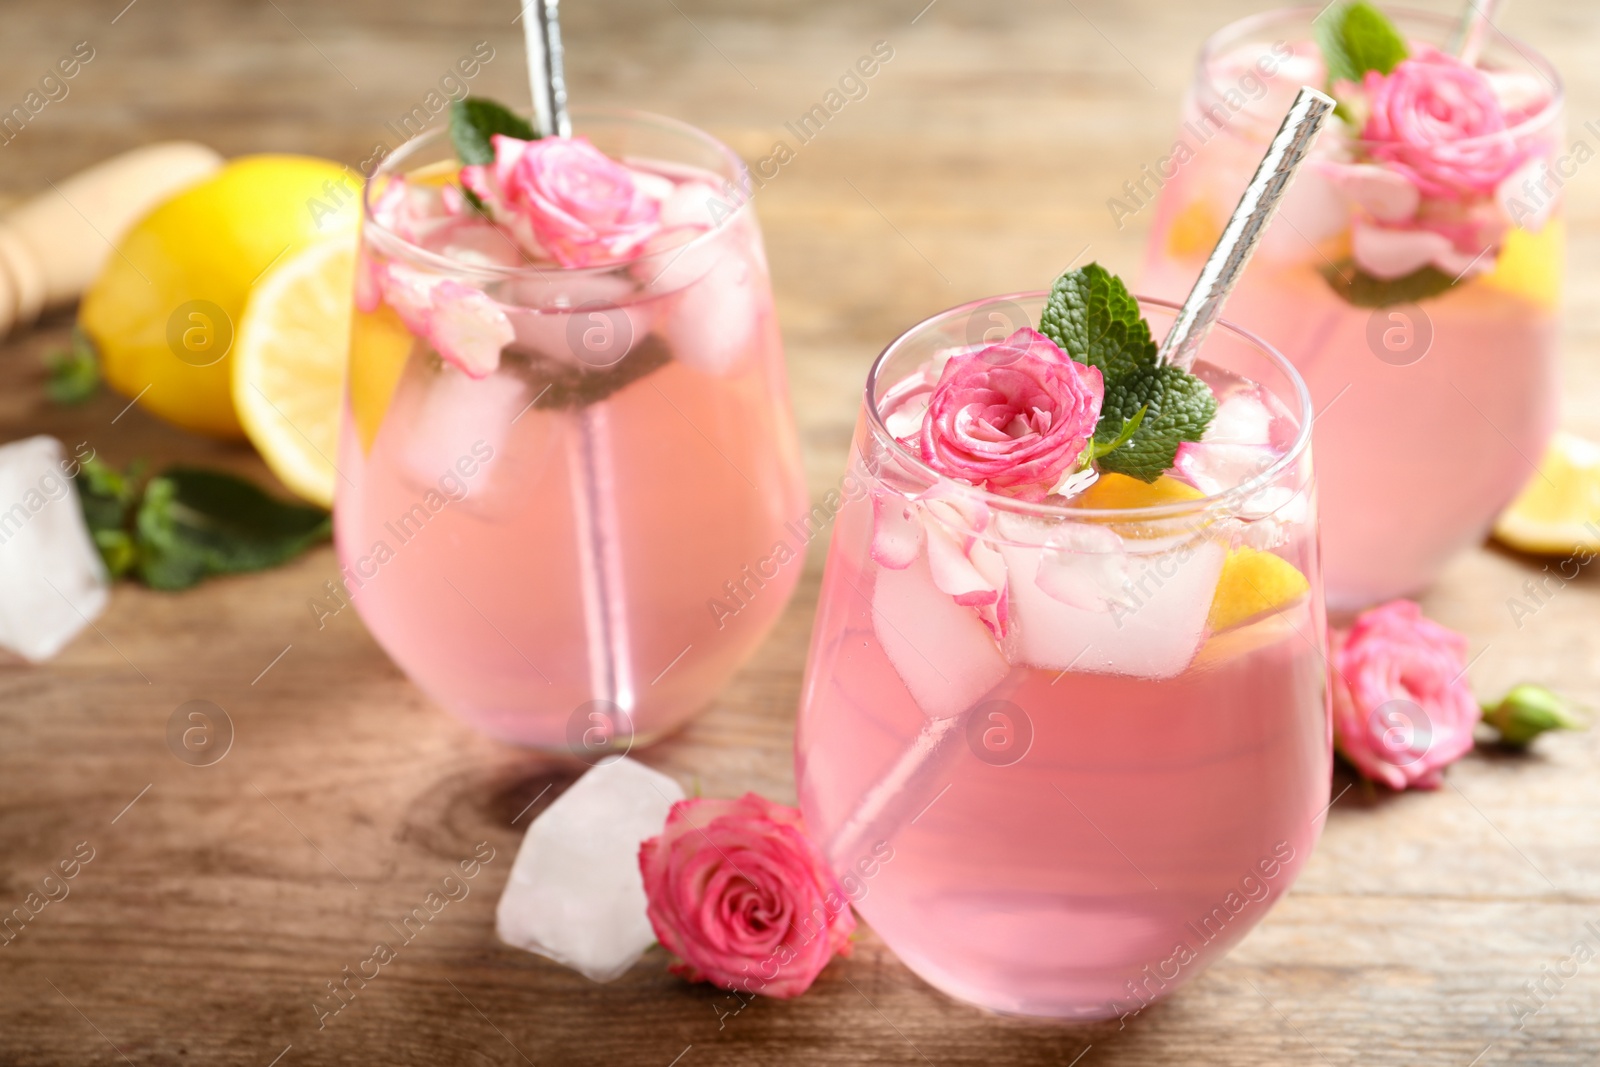 Photo of Delicious refreshing drink with rose flowers and lemon slices on wooden table, closeup